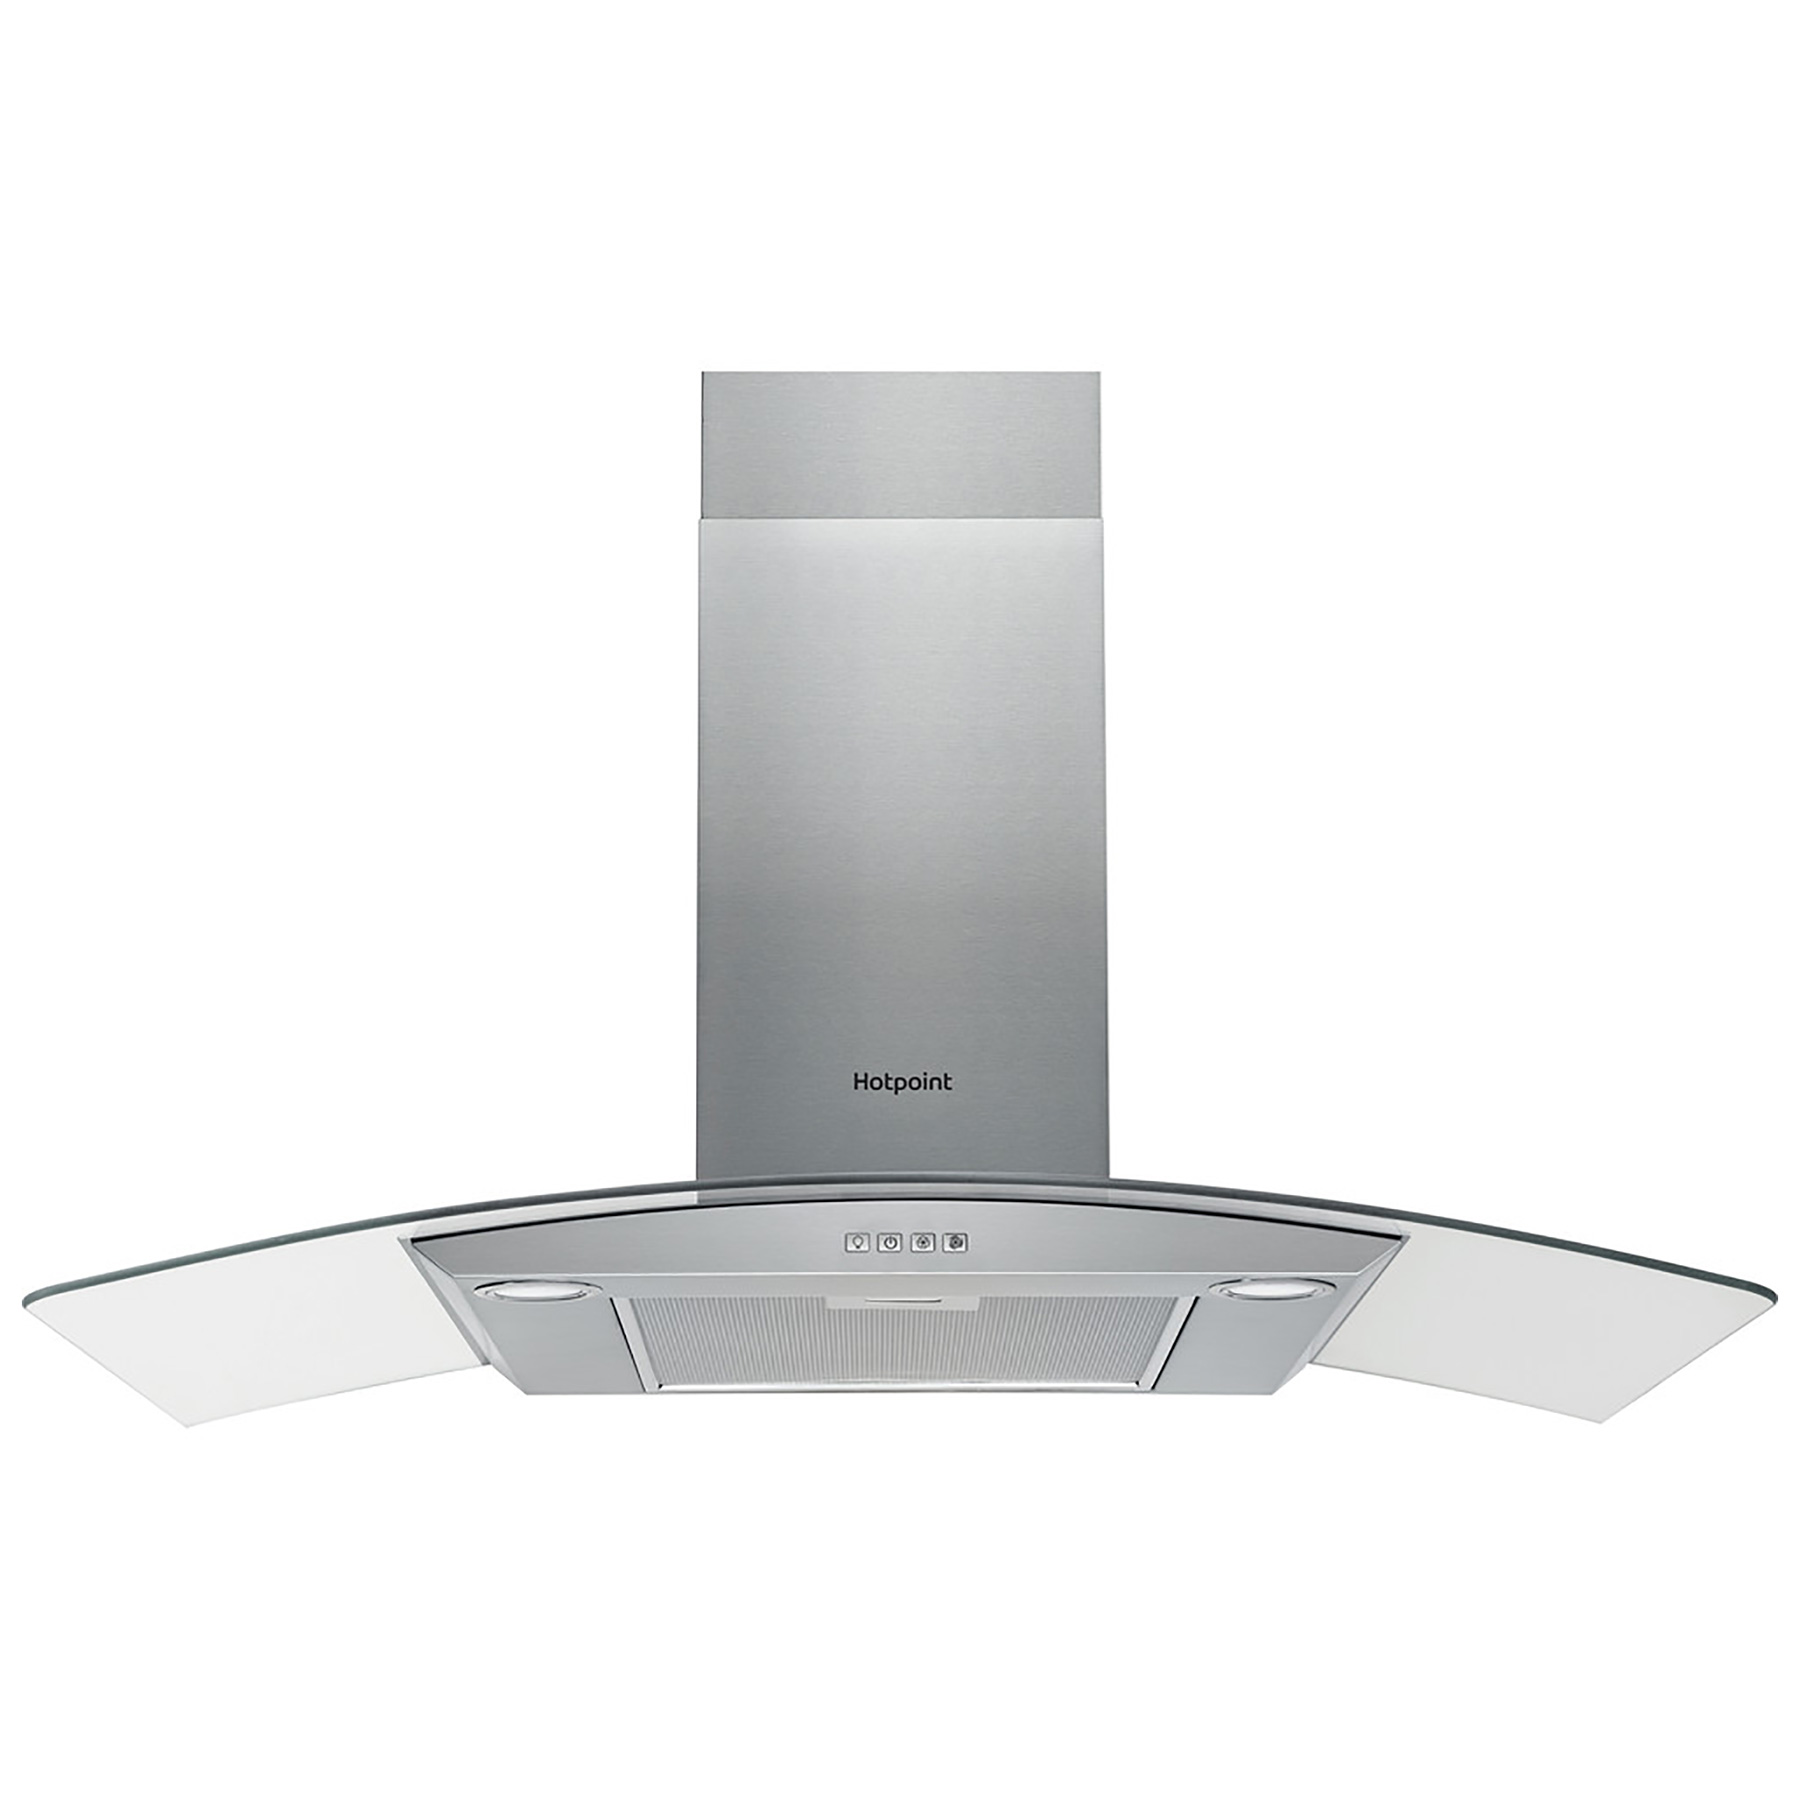 Image of Hotpoint PHGC9 4FLMX 90cm Curved Glass Chimney Hood in St Steel 3 Spee